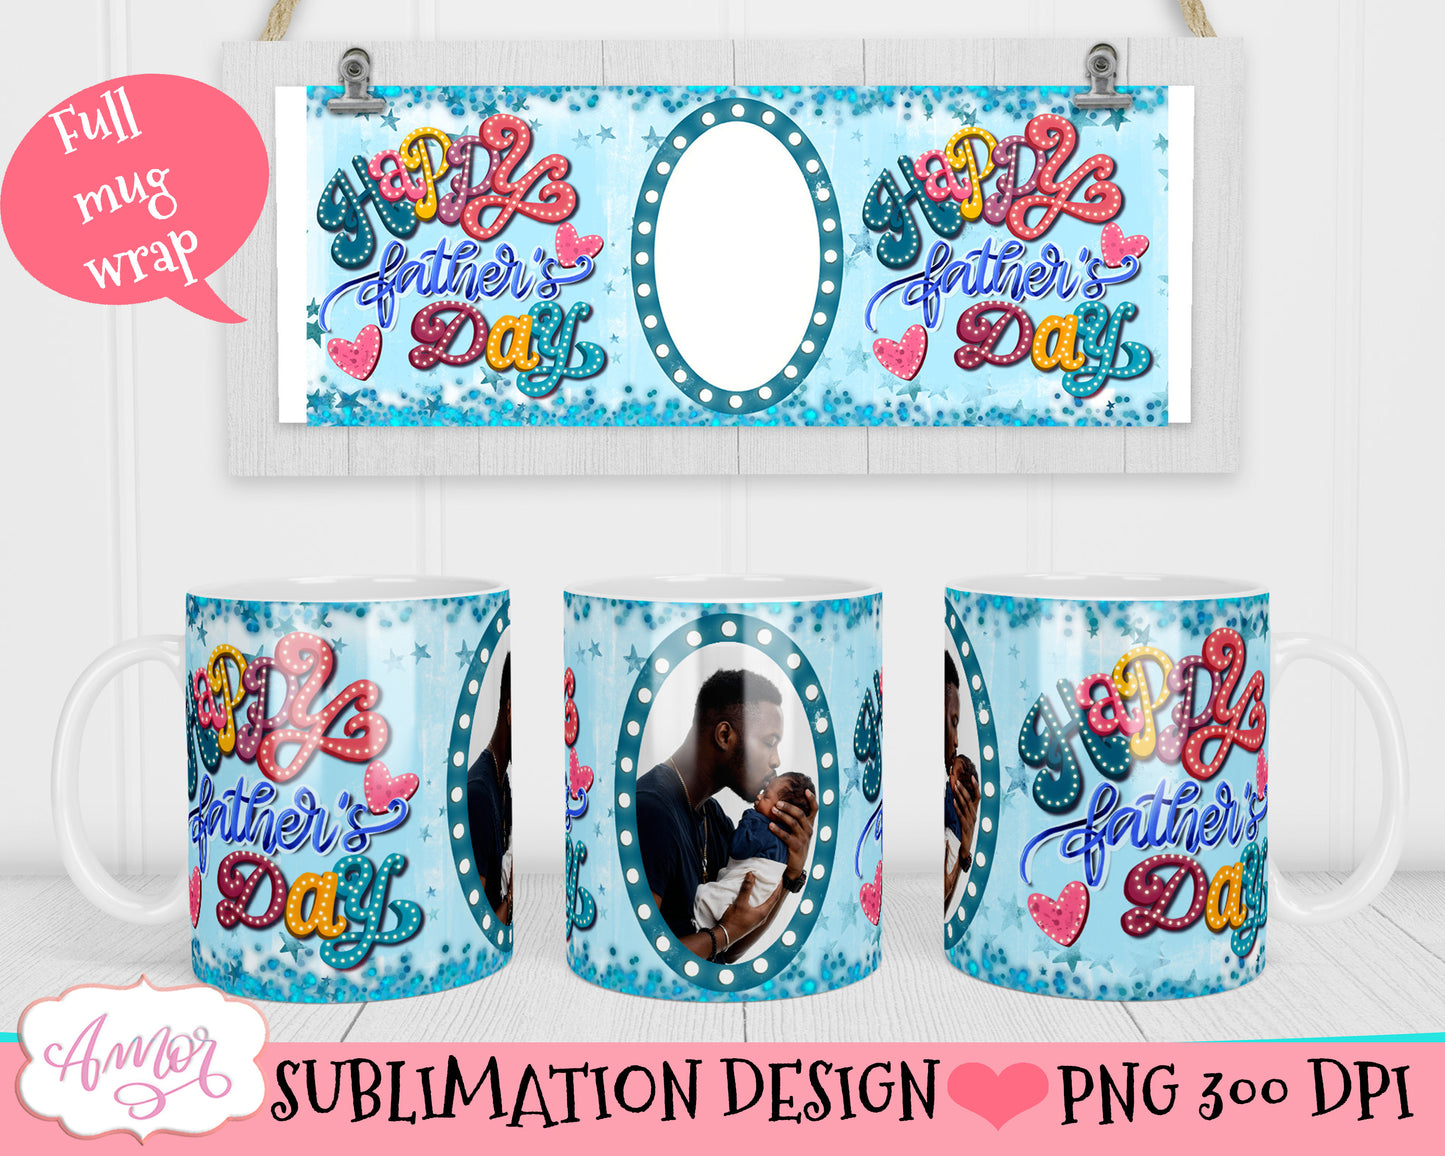 Photo mug wrap sublimation design for father's day